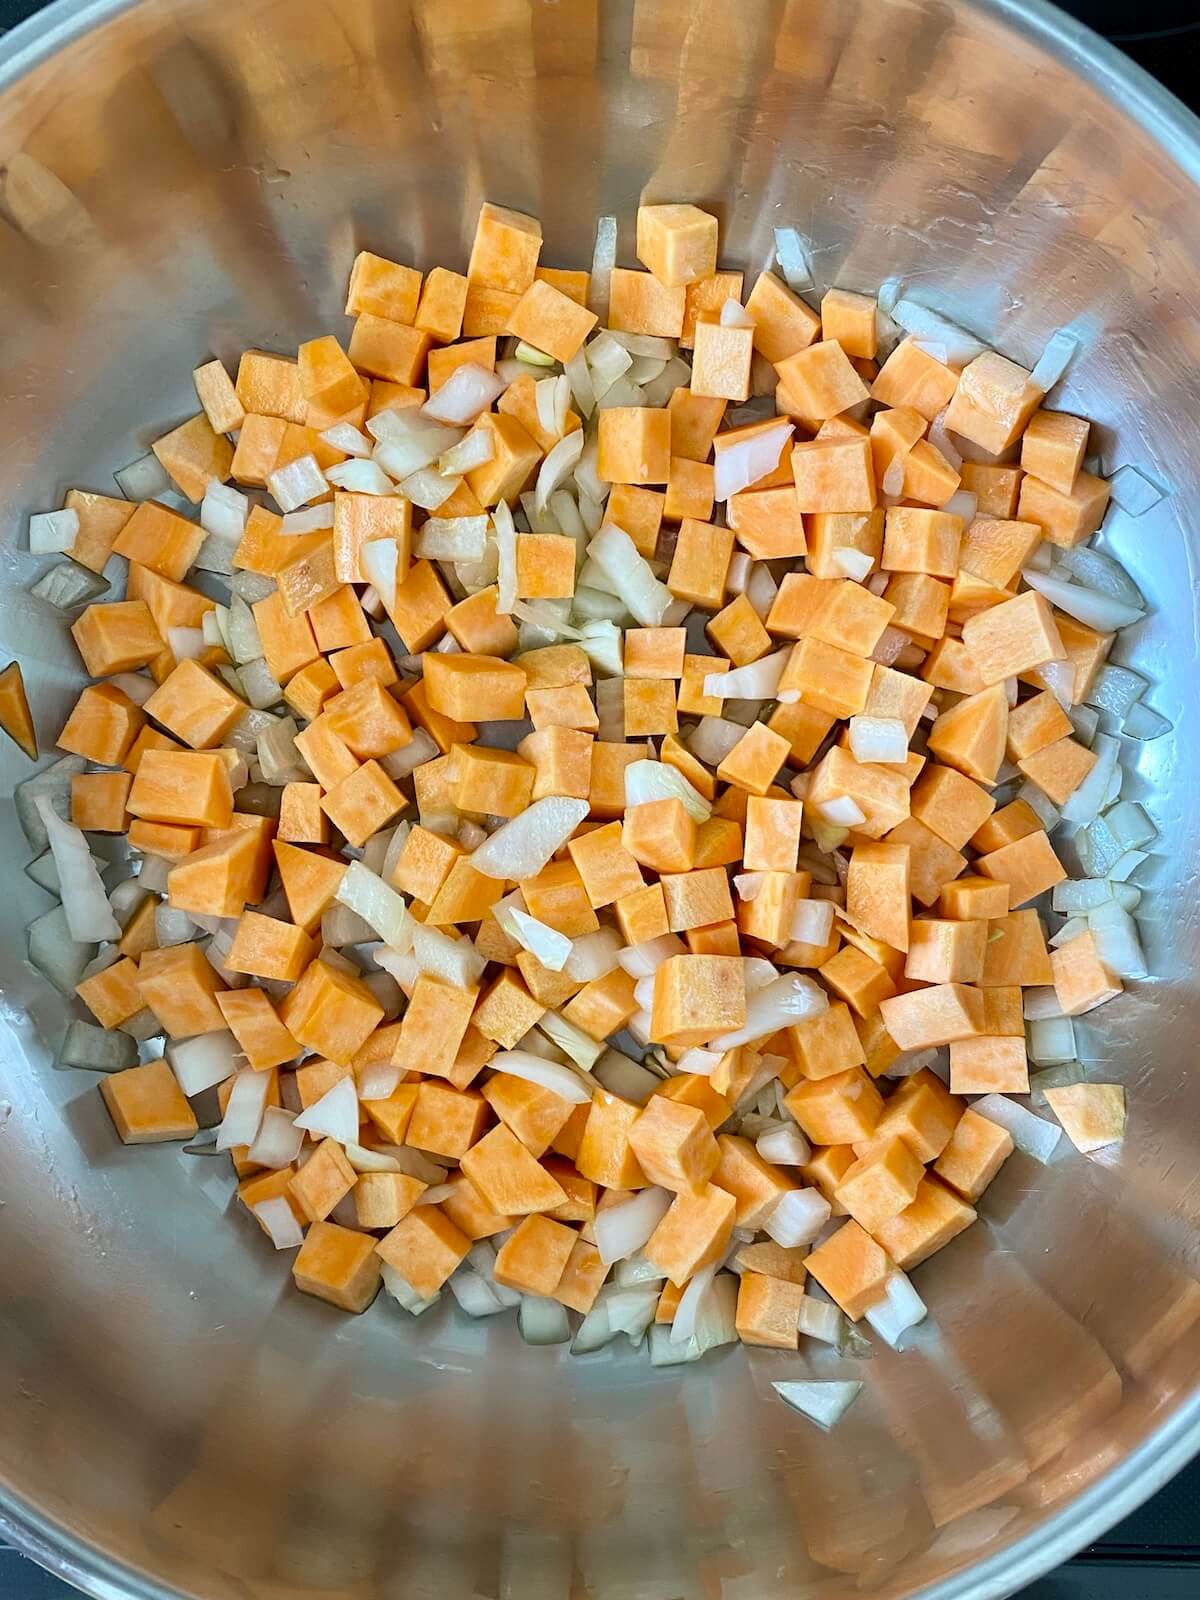 Diced sweet potato and onion being sautéed in a stainless steel skillet.